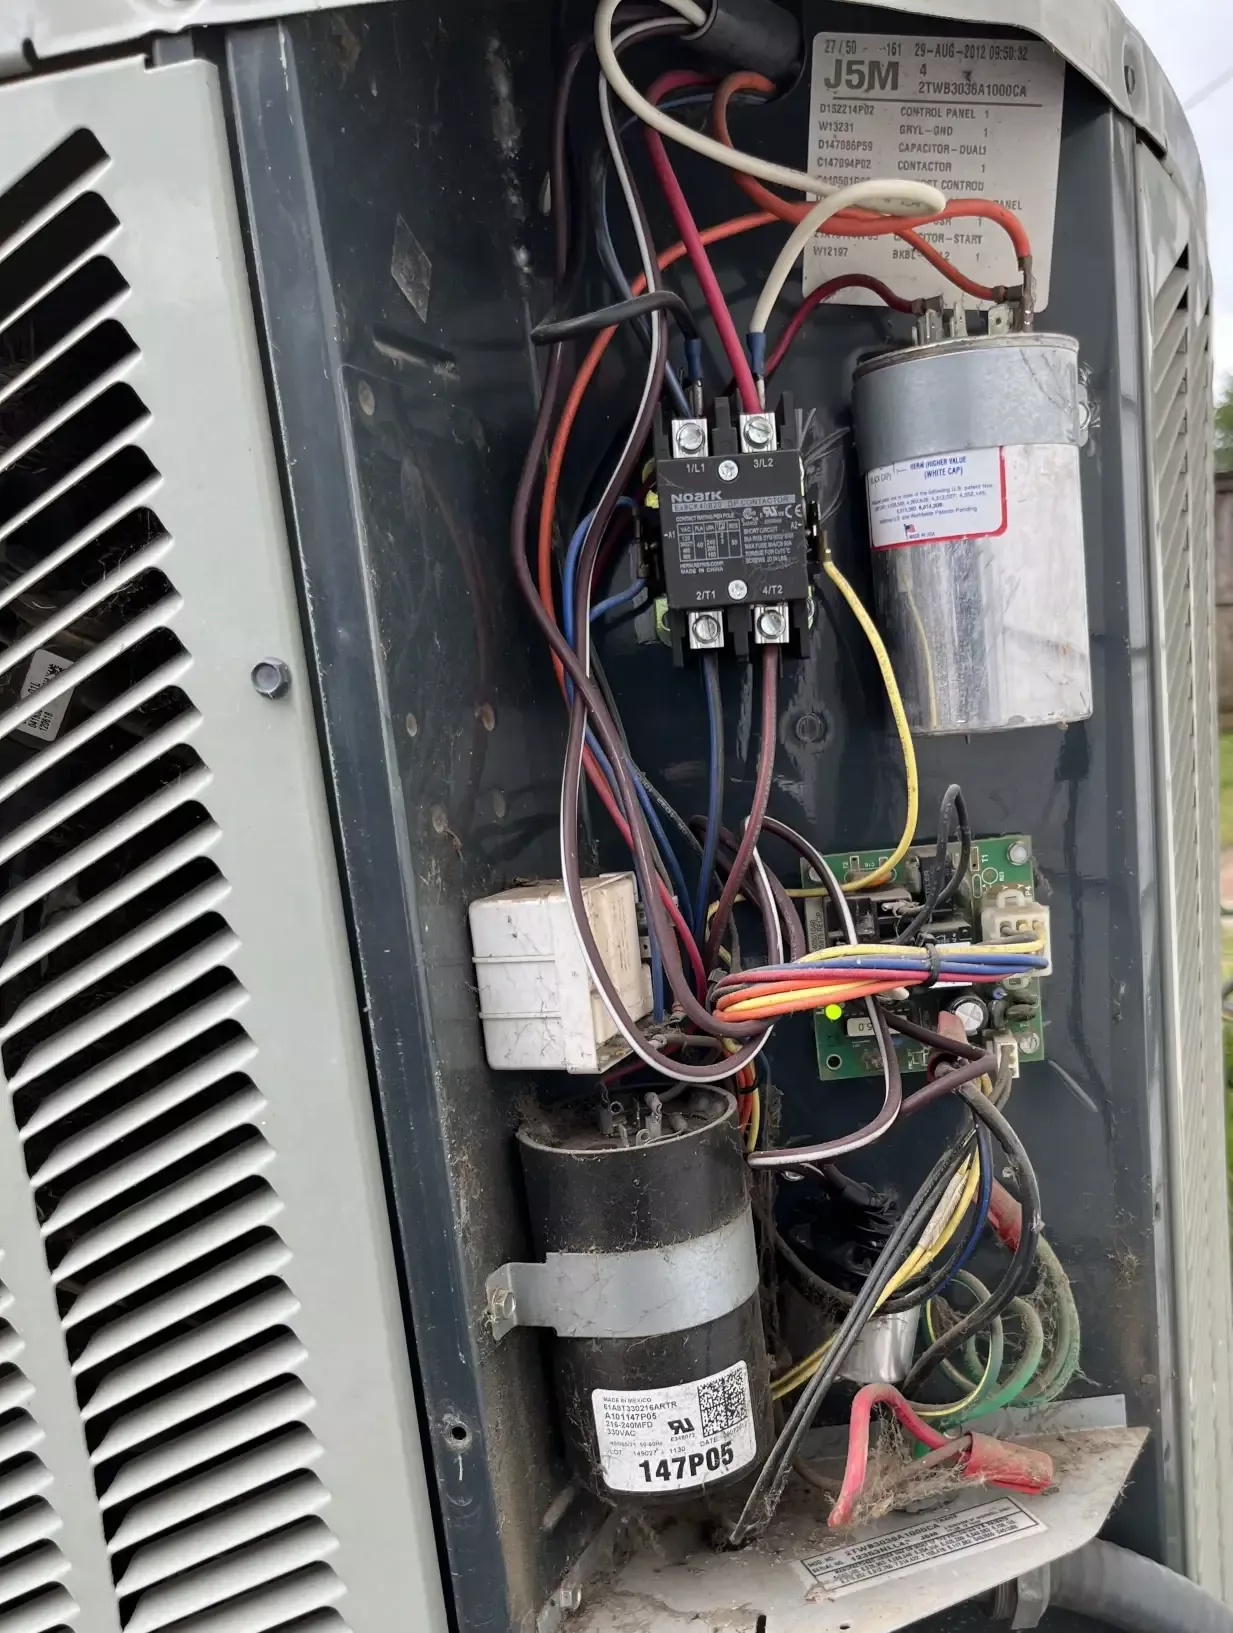 Electrical issue on a HVAC control board